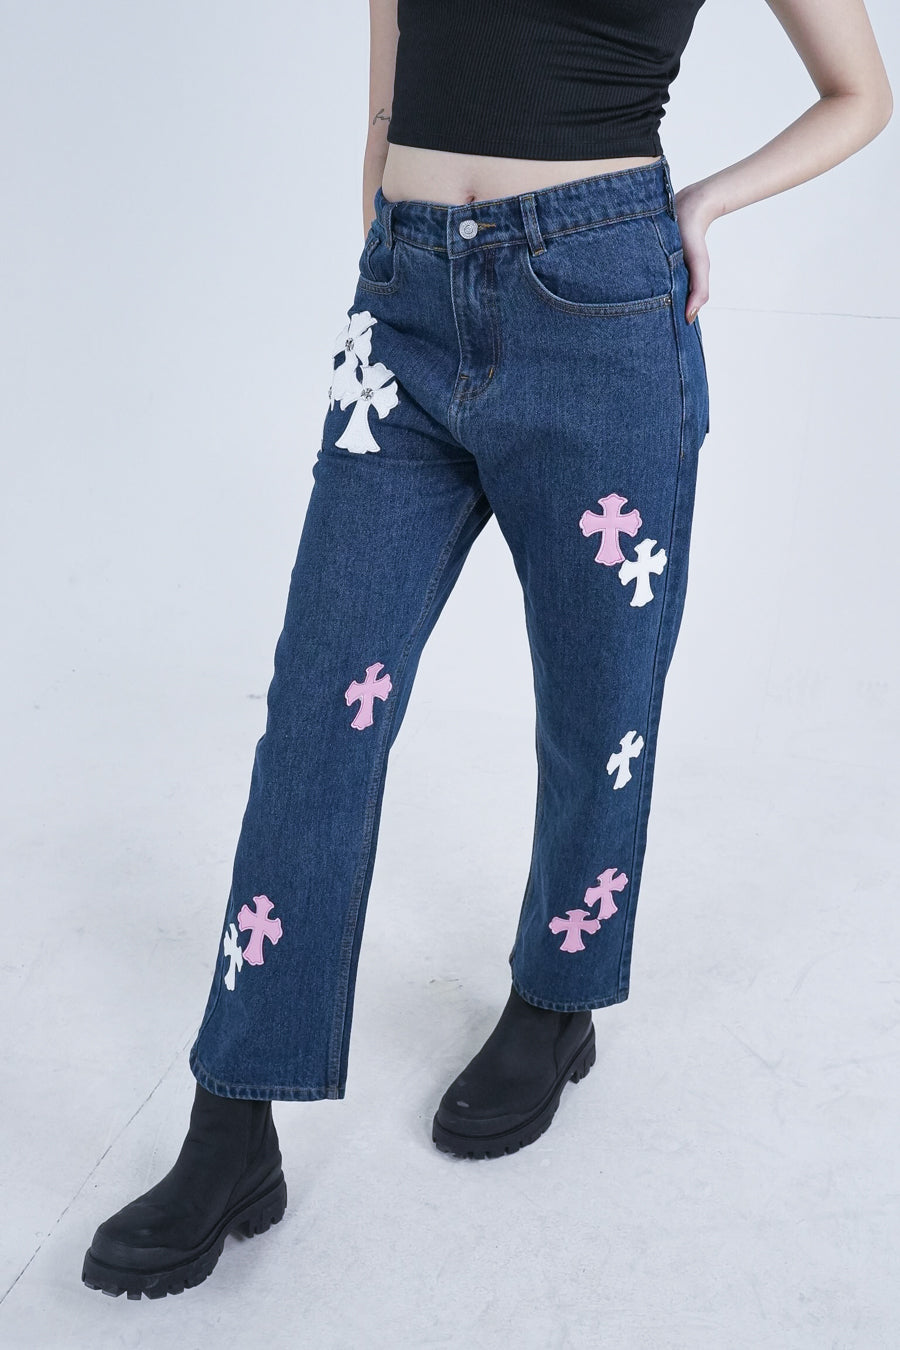 WHITE AND PINK LEATHER CROSS VALKYRE JEANS